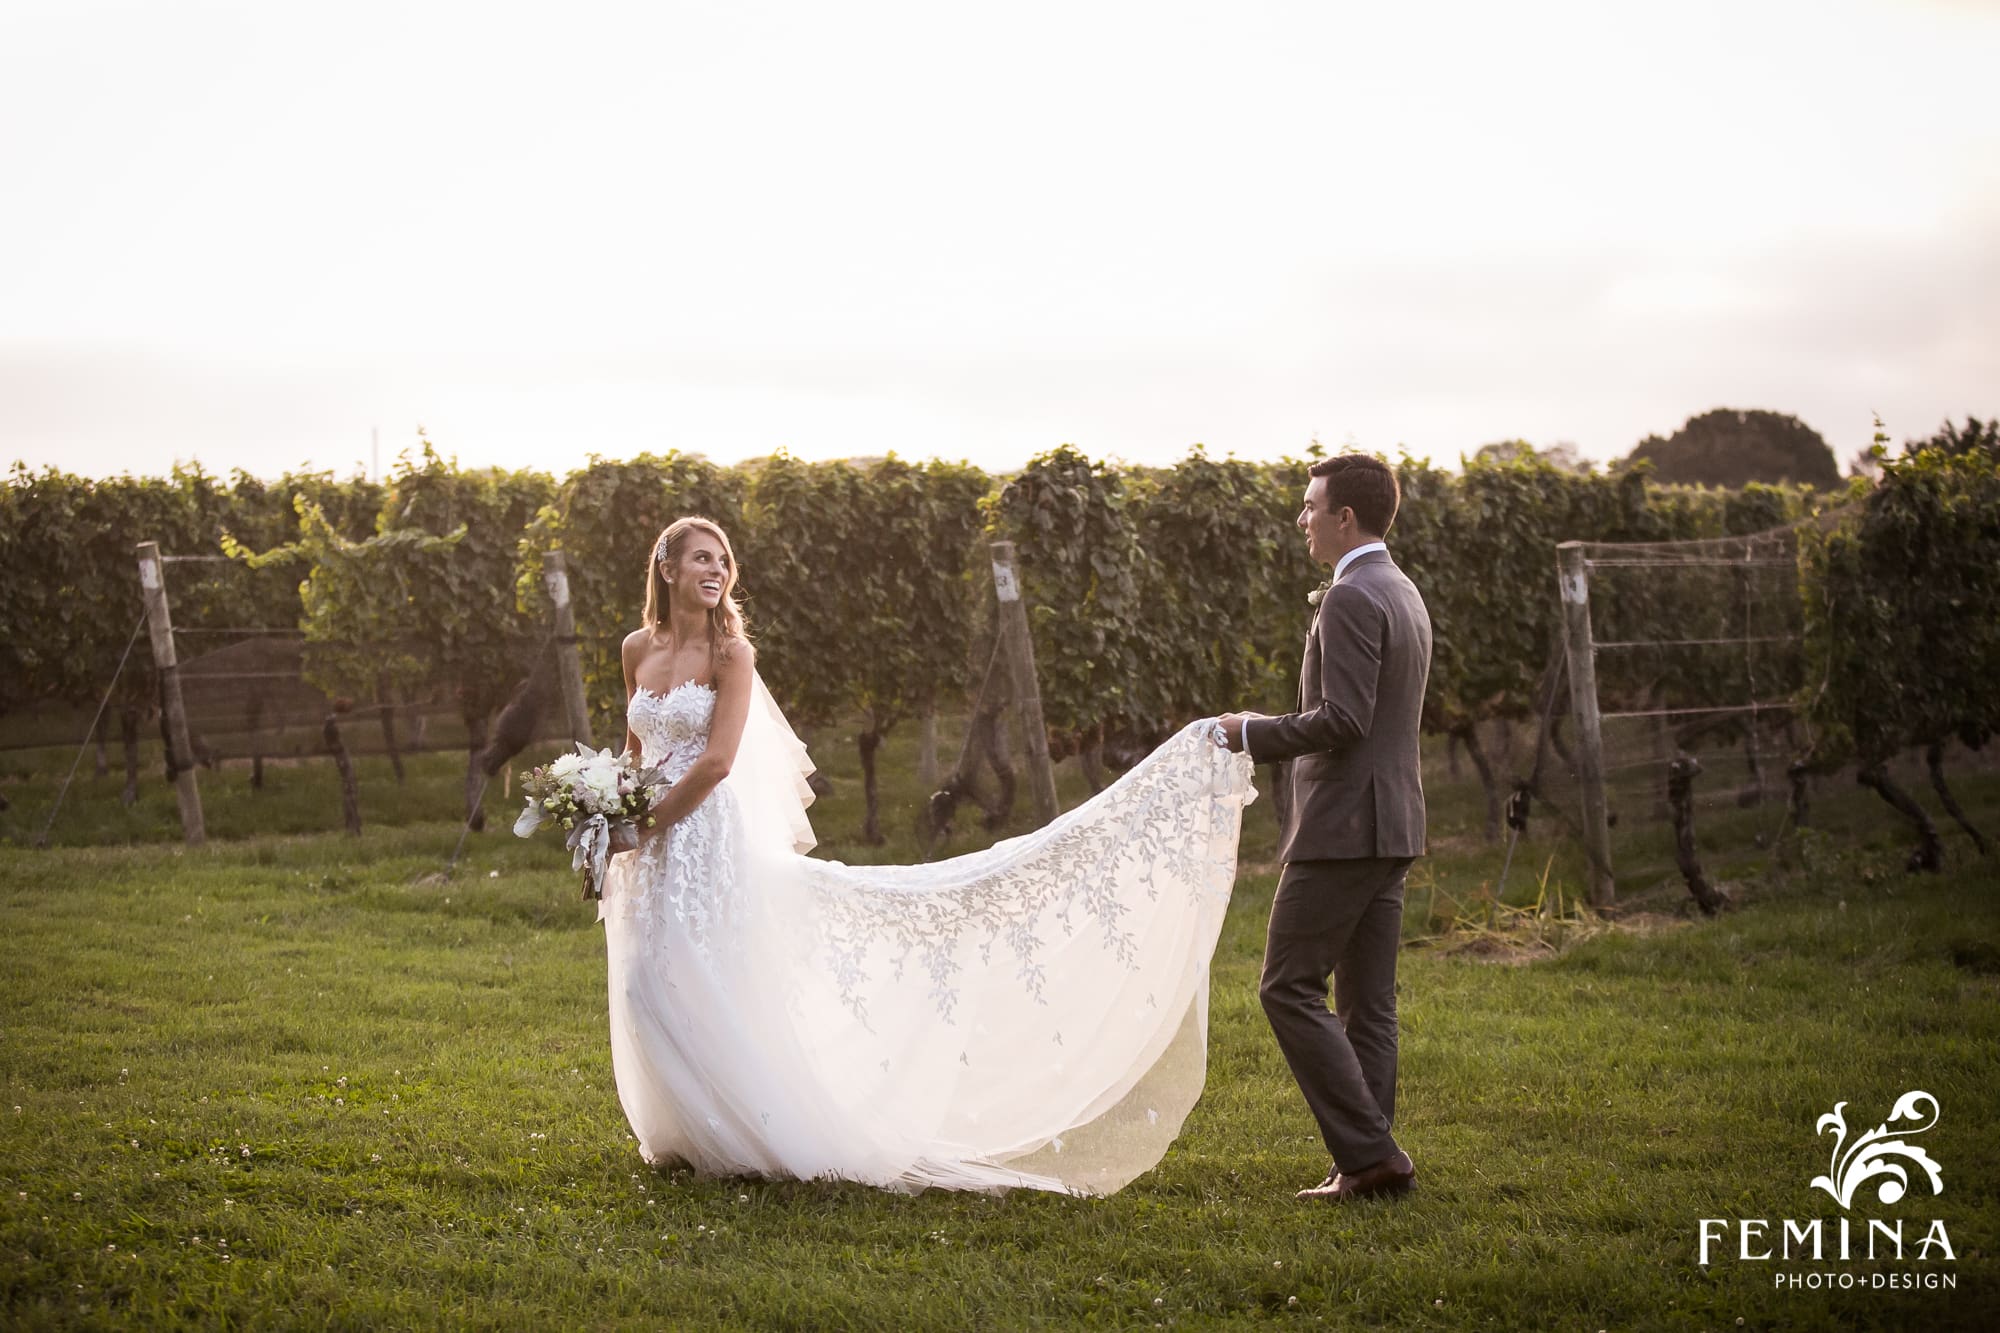 Tommy carries Lindsey's dress as they walk through the vineyard at Bedell Cellars